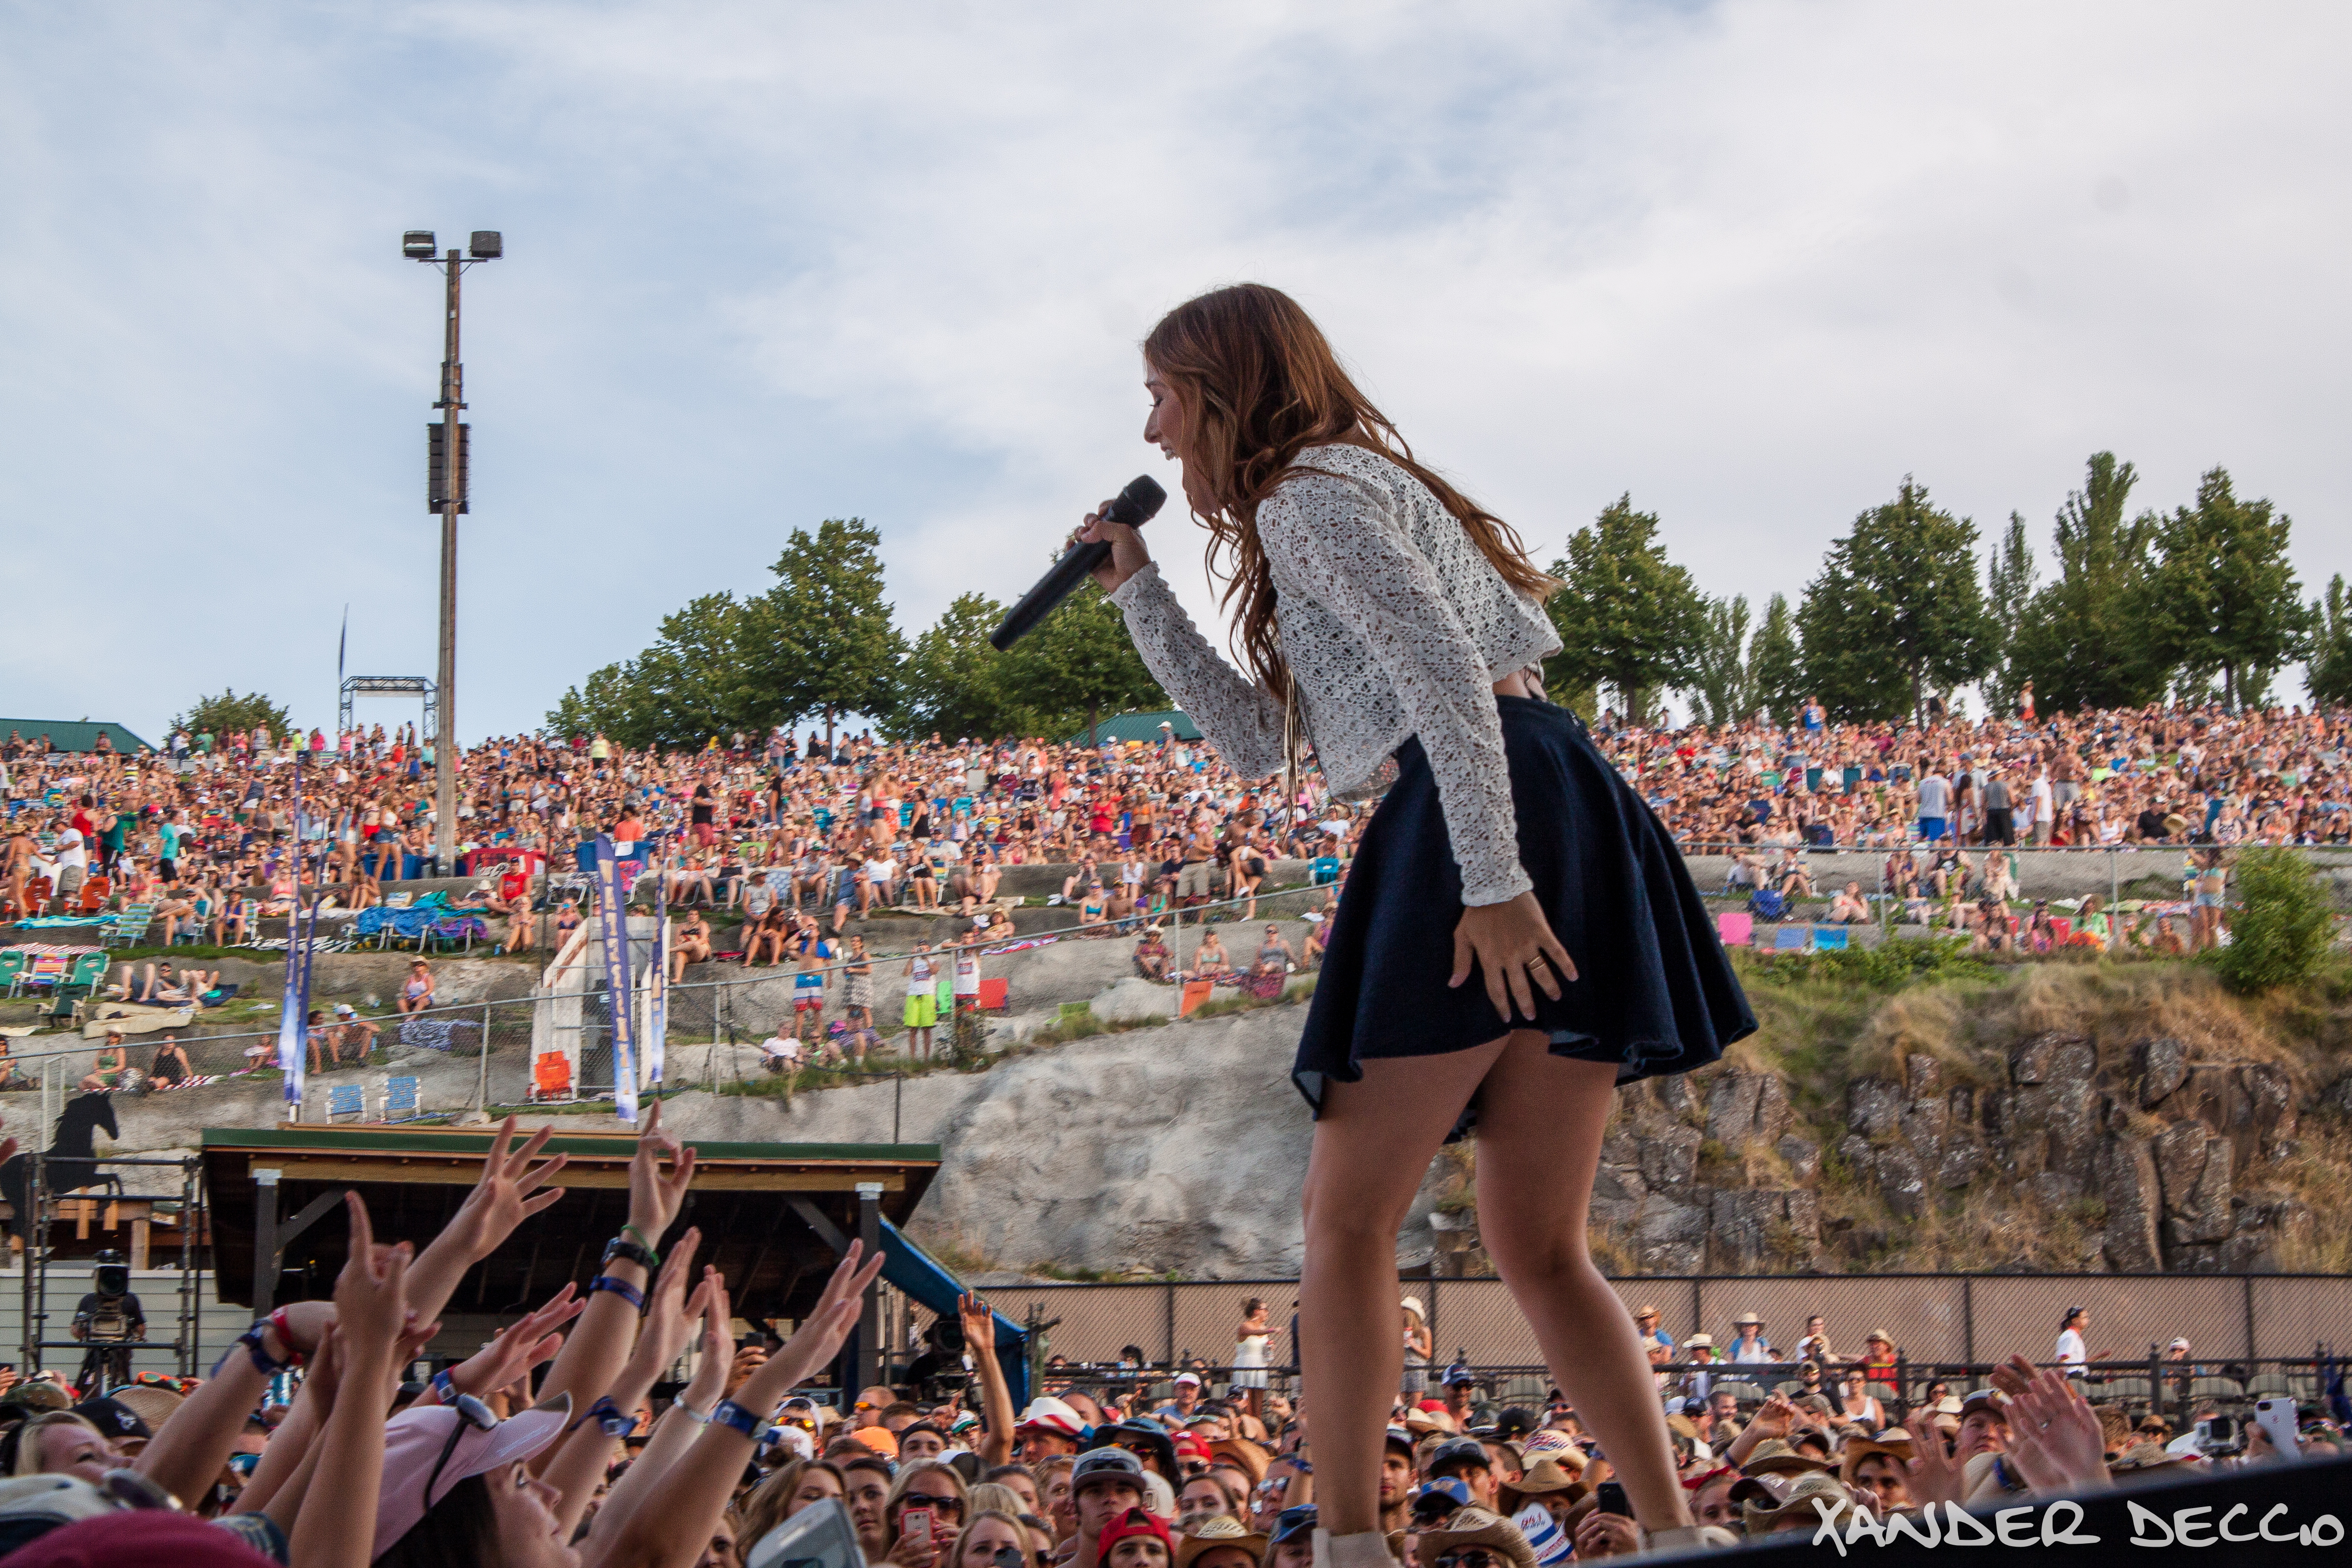 Cassadee Pope @ Watershed 2014 (Photo By Xander Deccio)